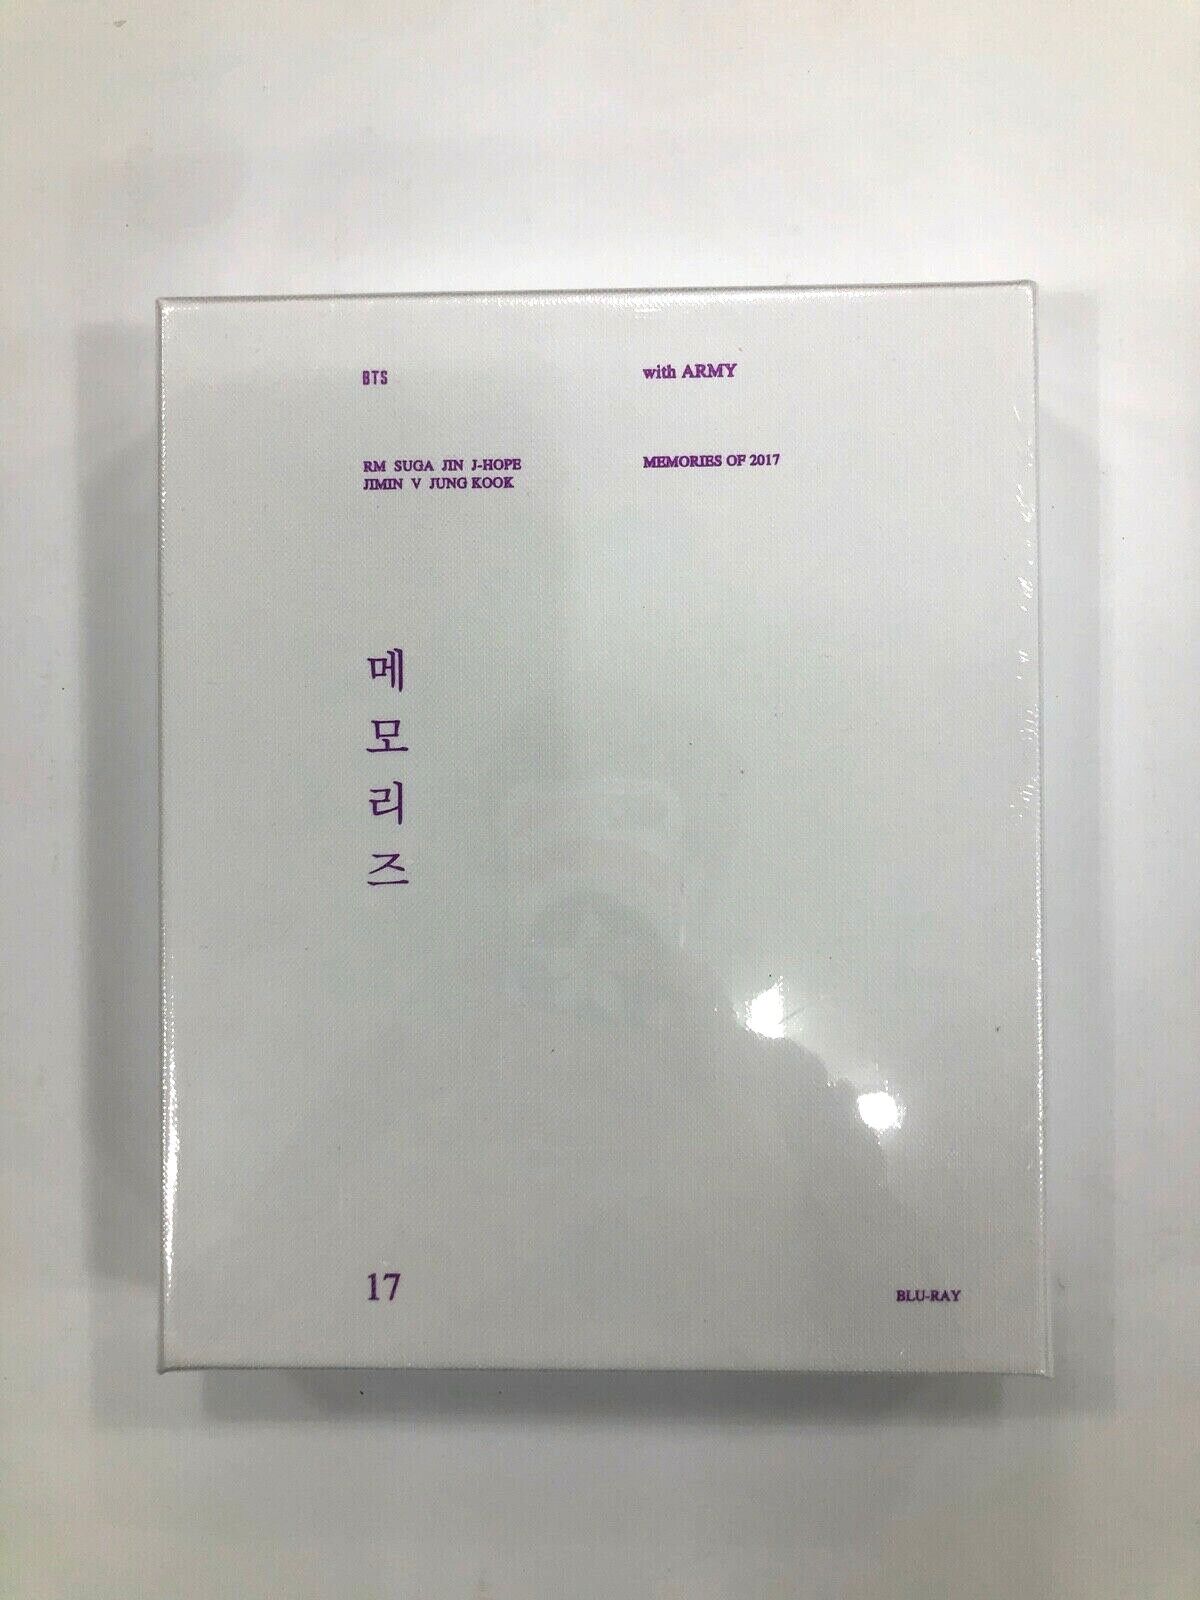 [FACTORY SEALED] BTS Memories Of 2017 Bluray+Tracking Number